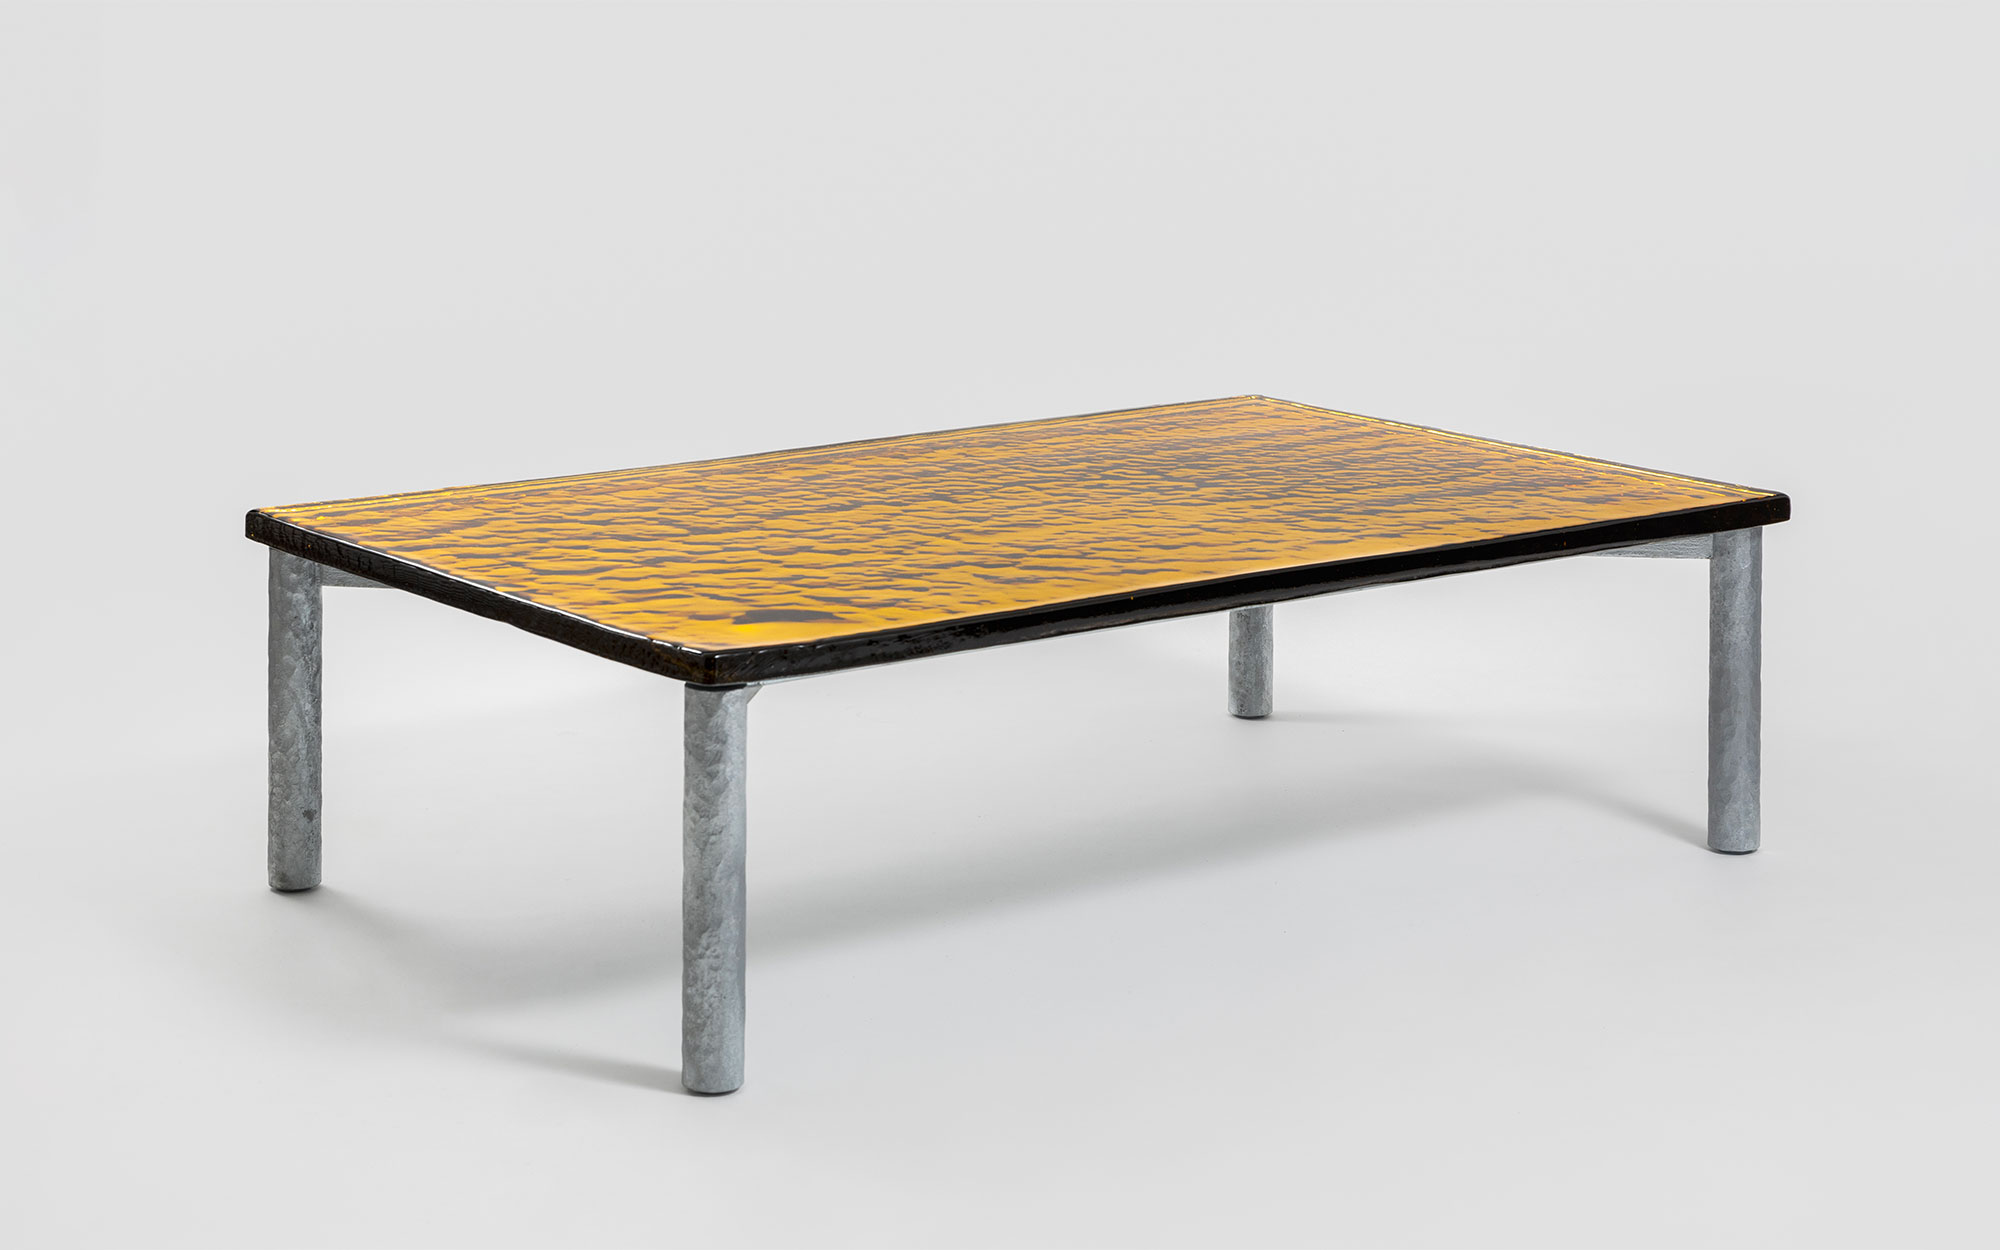 Flou Coffee Table - Ronan Bouroullec - Art and Drawing - Galerie kreo